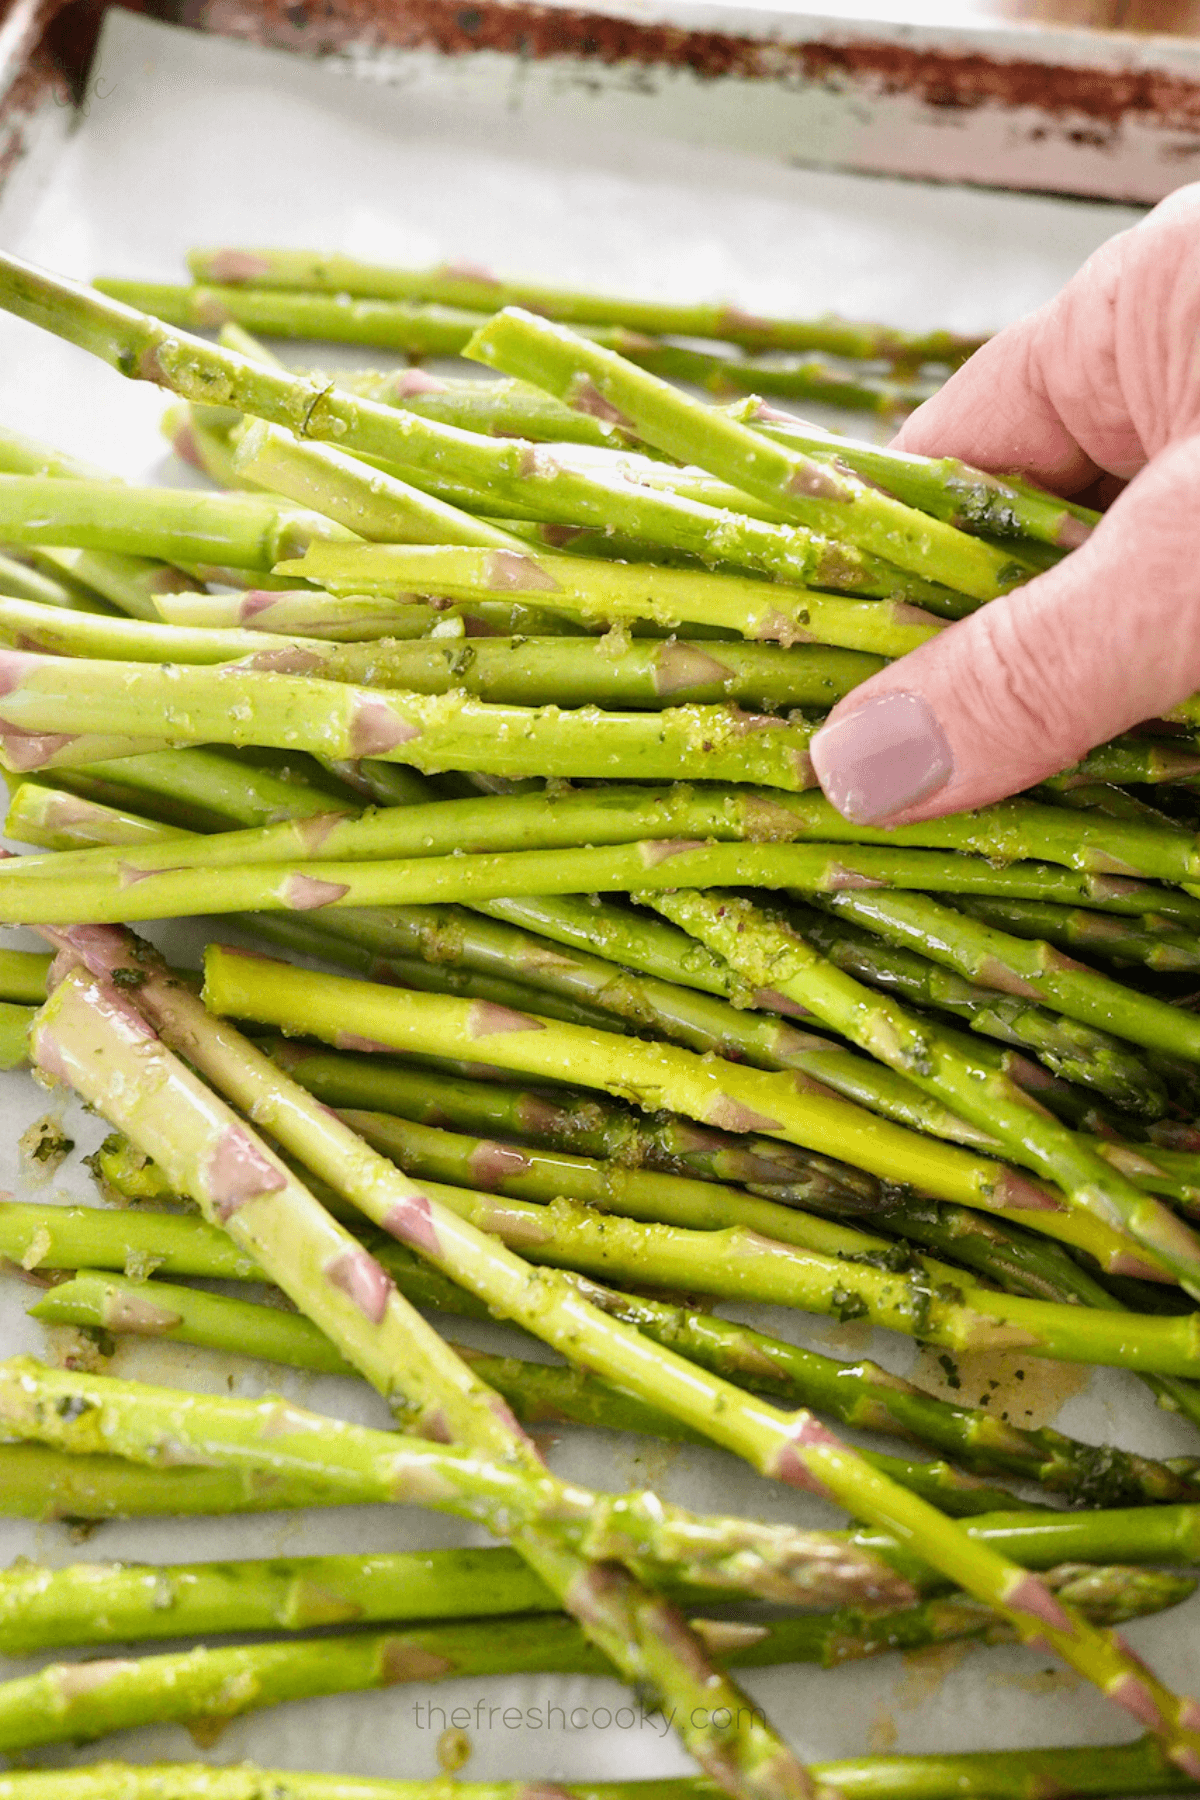 Using hands to toss the fresh asparagus in oil mixture for air fryer asparagus.